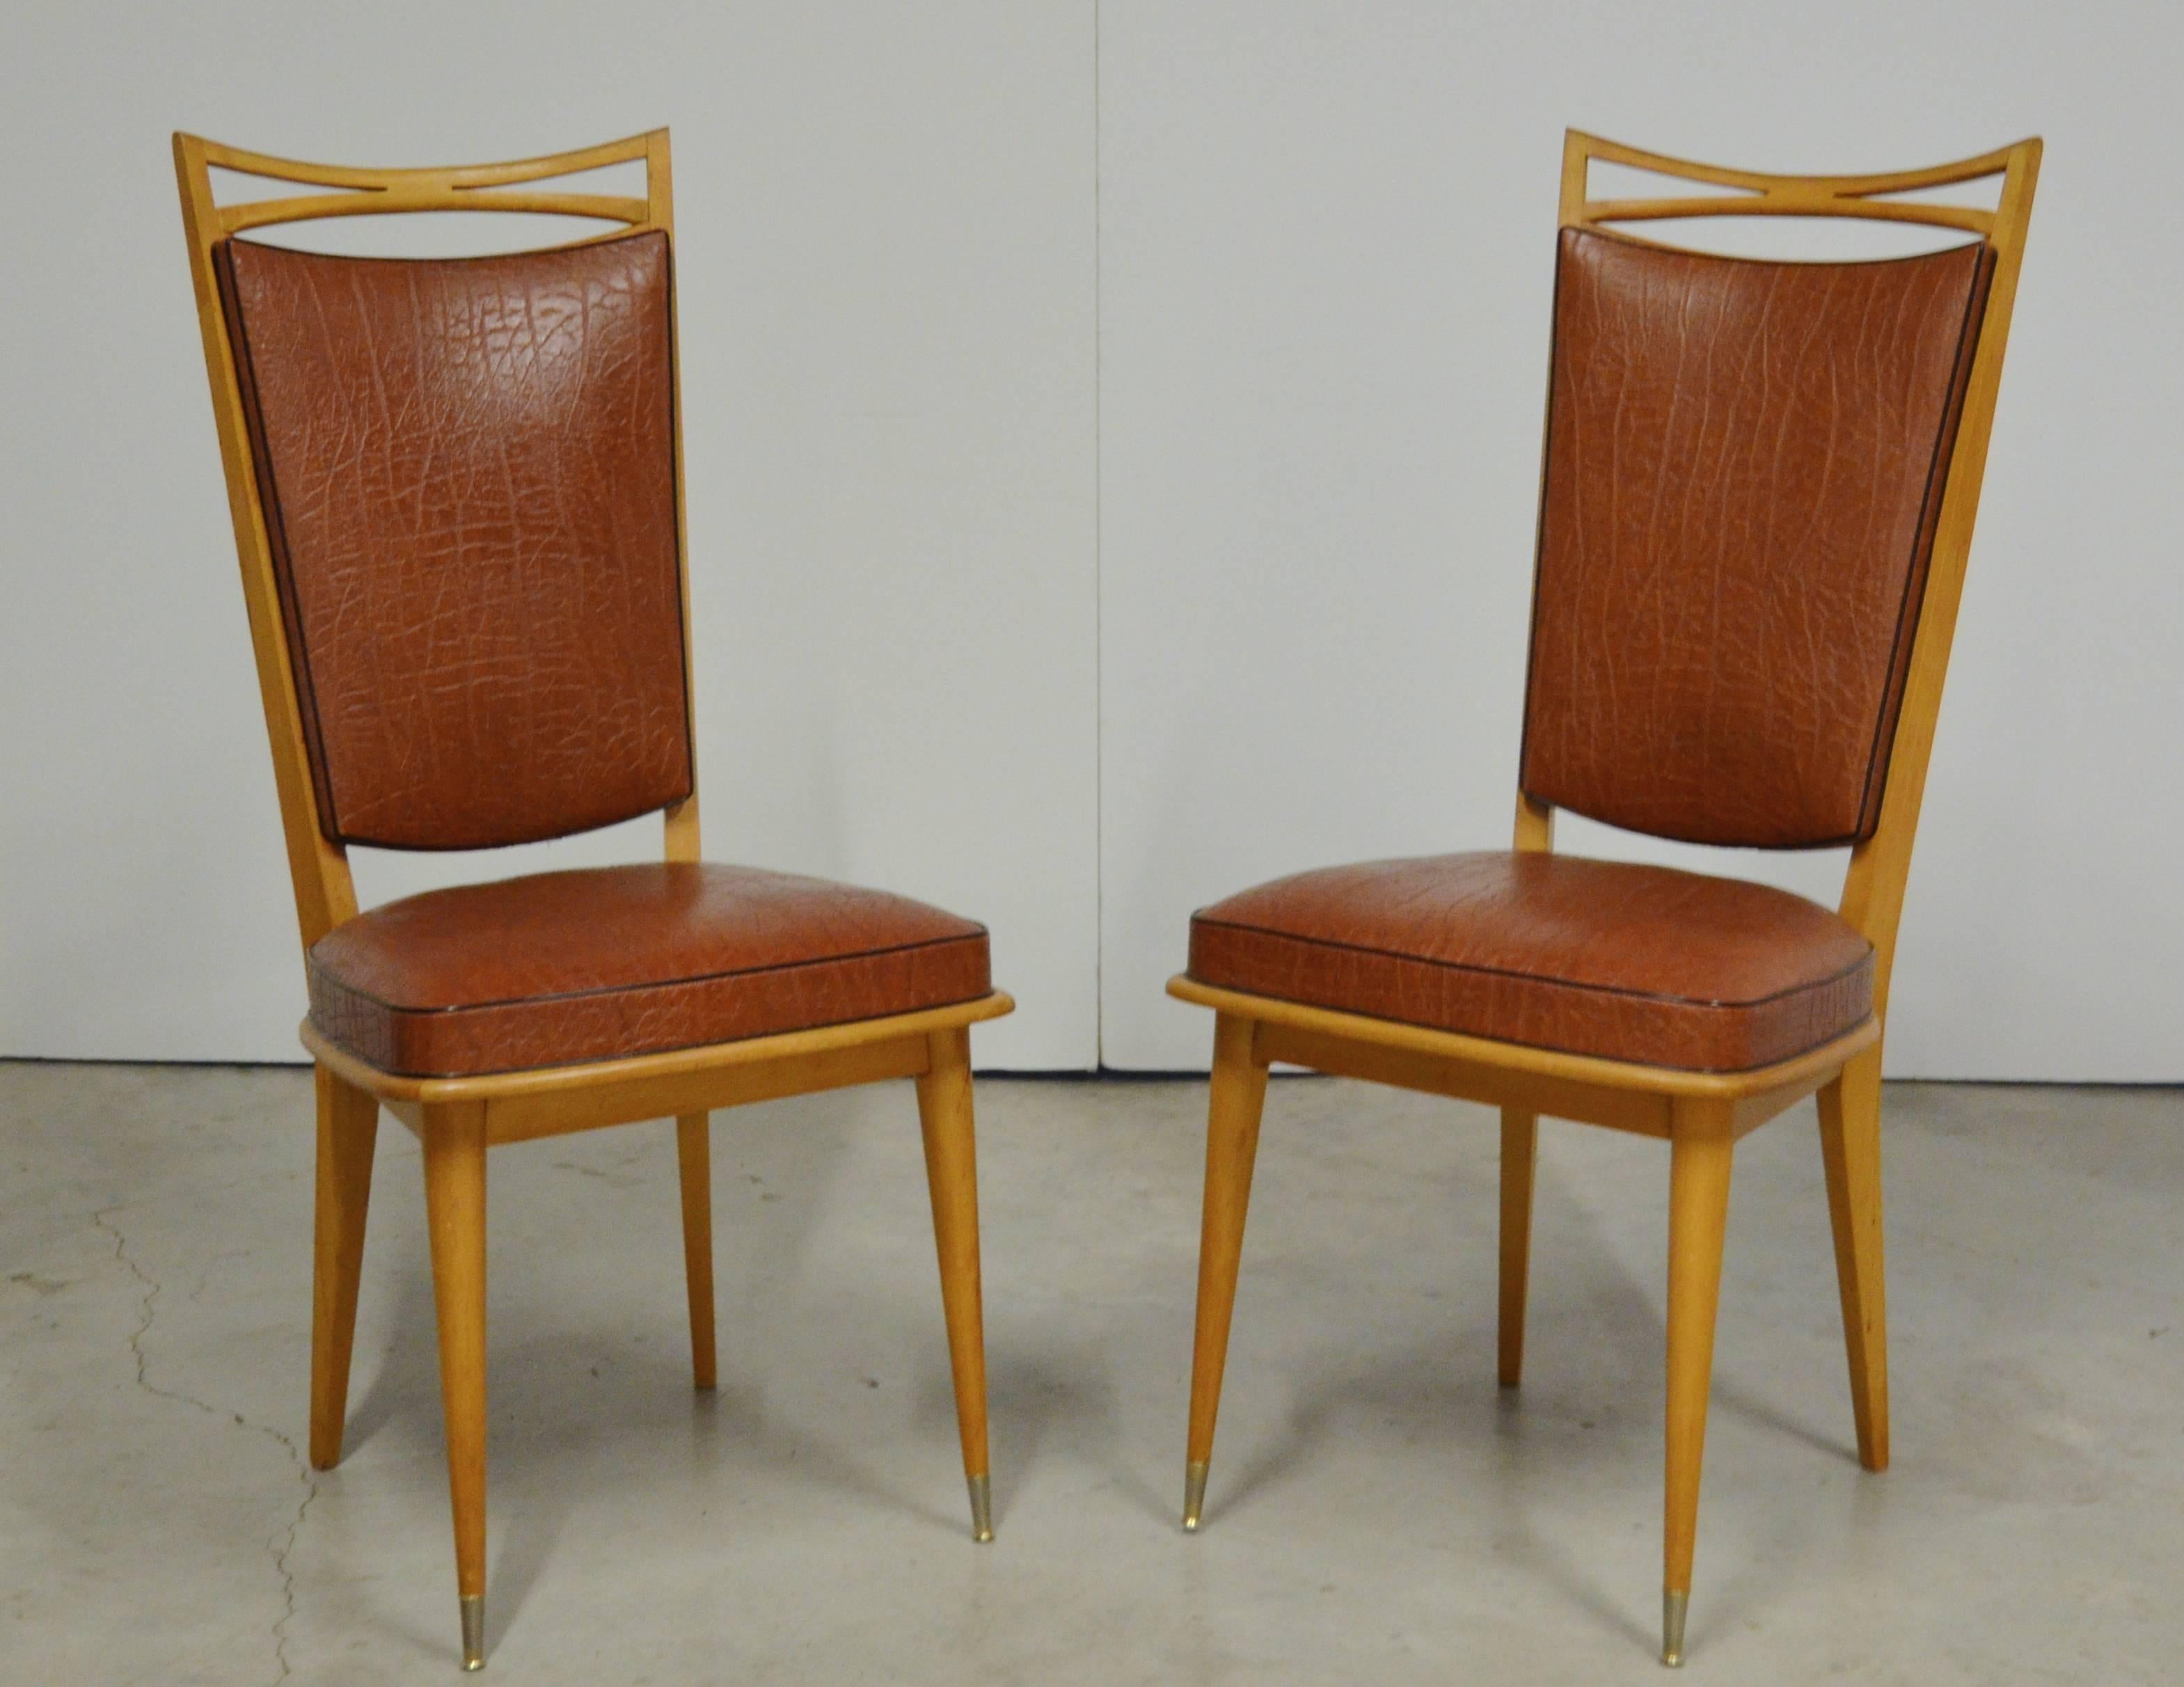 French Art Deco dining side chairs, 1930s, marked Fabrique de Meubles E. Santrossian Draguignan. With a pierced crest rail over upholstery at back and seat on turned tapered legs with brass capped feet. Original vinyl upholstery in good condition.